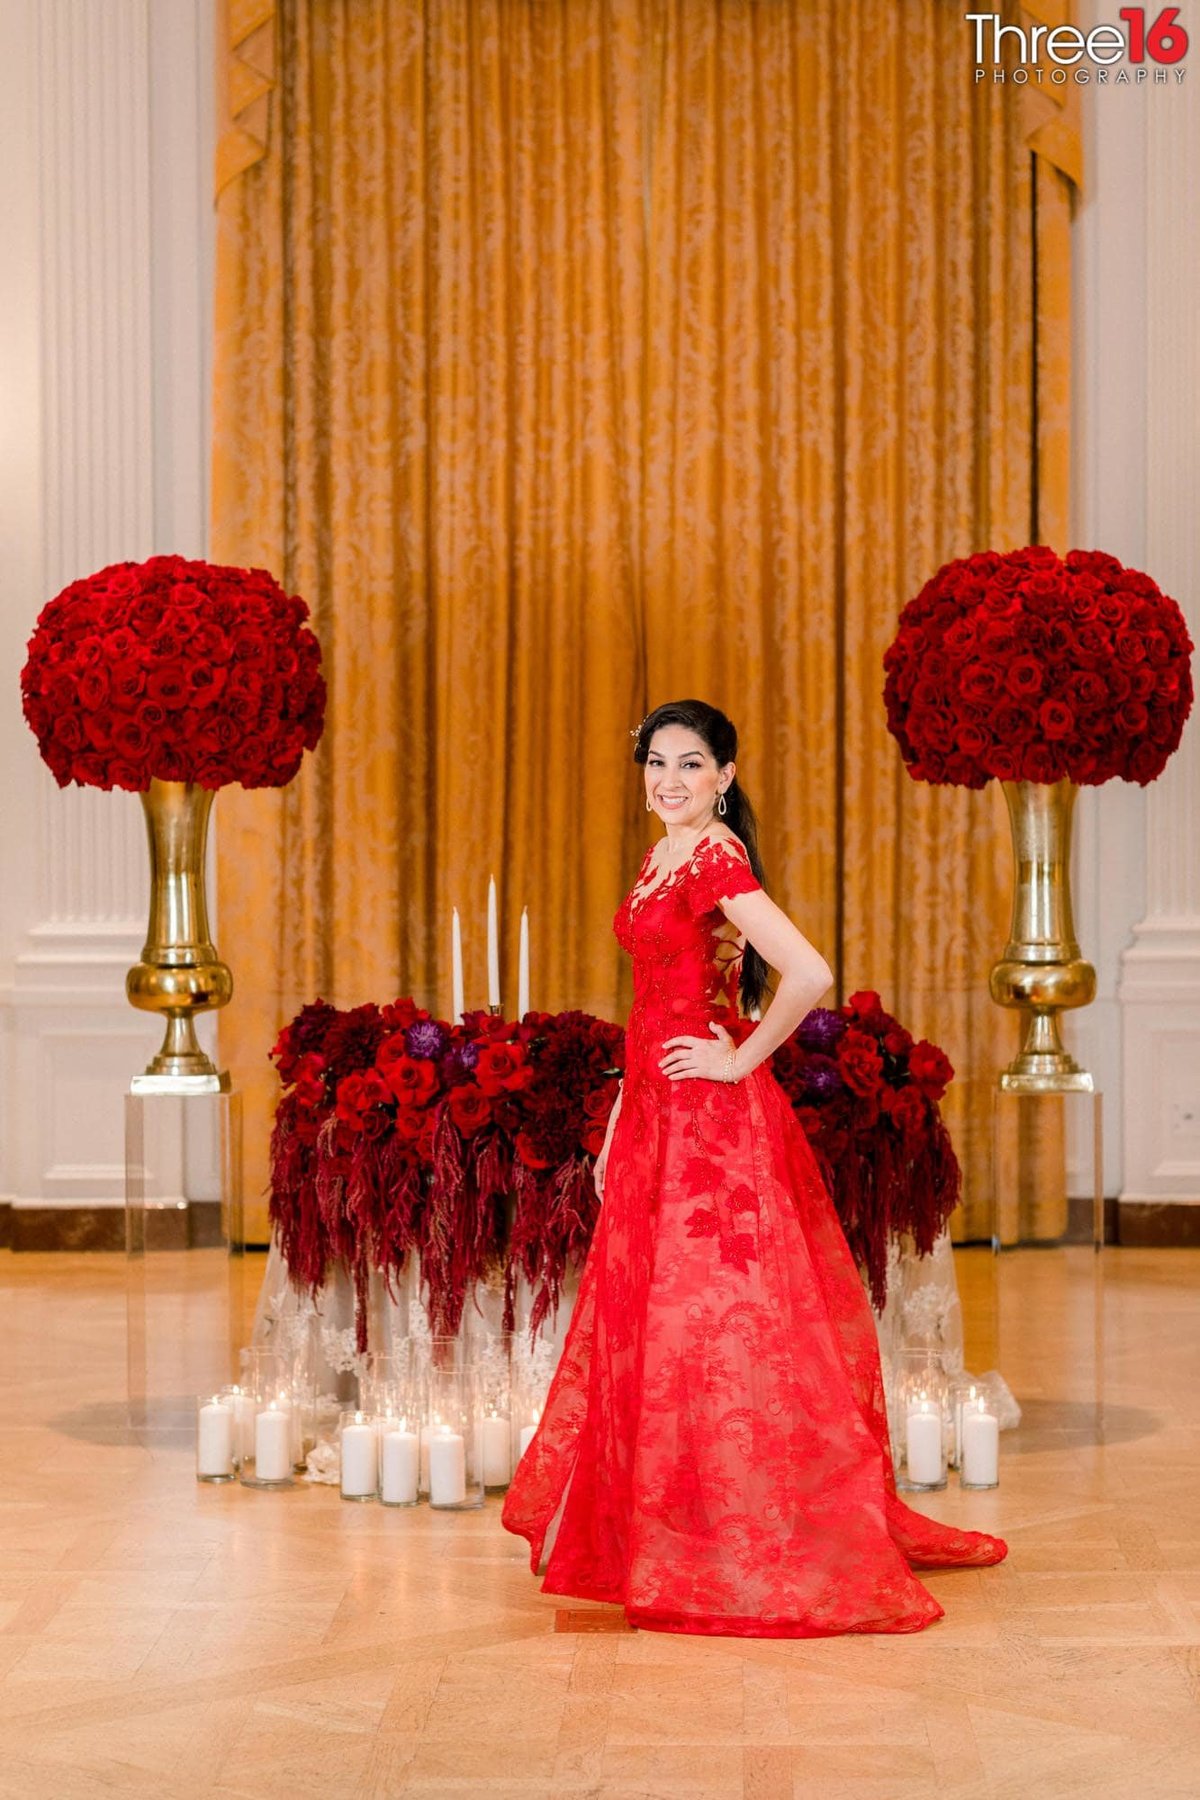 Bride dressed in a red dress stands in front of the sweetheart table